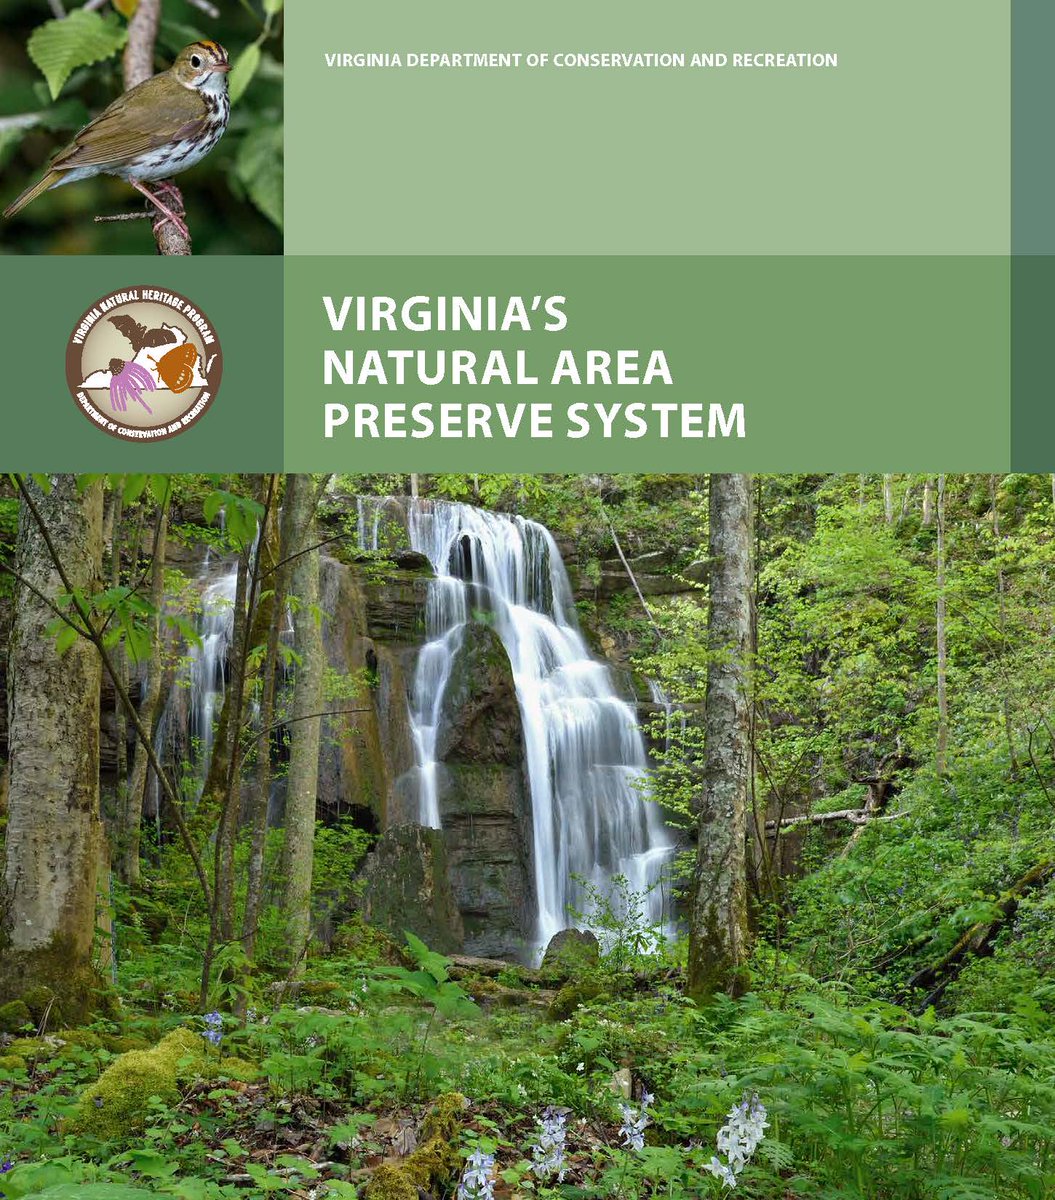 Check out our recently updated #NaturalAreaPreserve guide: dcr.virginia.gov/natural-herita… It invites you to explore the 24 natural area preserves that offer public access. Which preserve will you visit next? #VisitVA #VAoutdoors @naturalareas